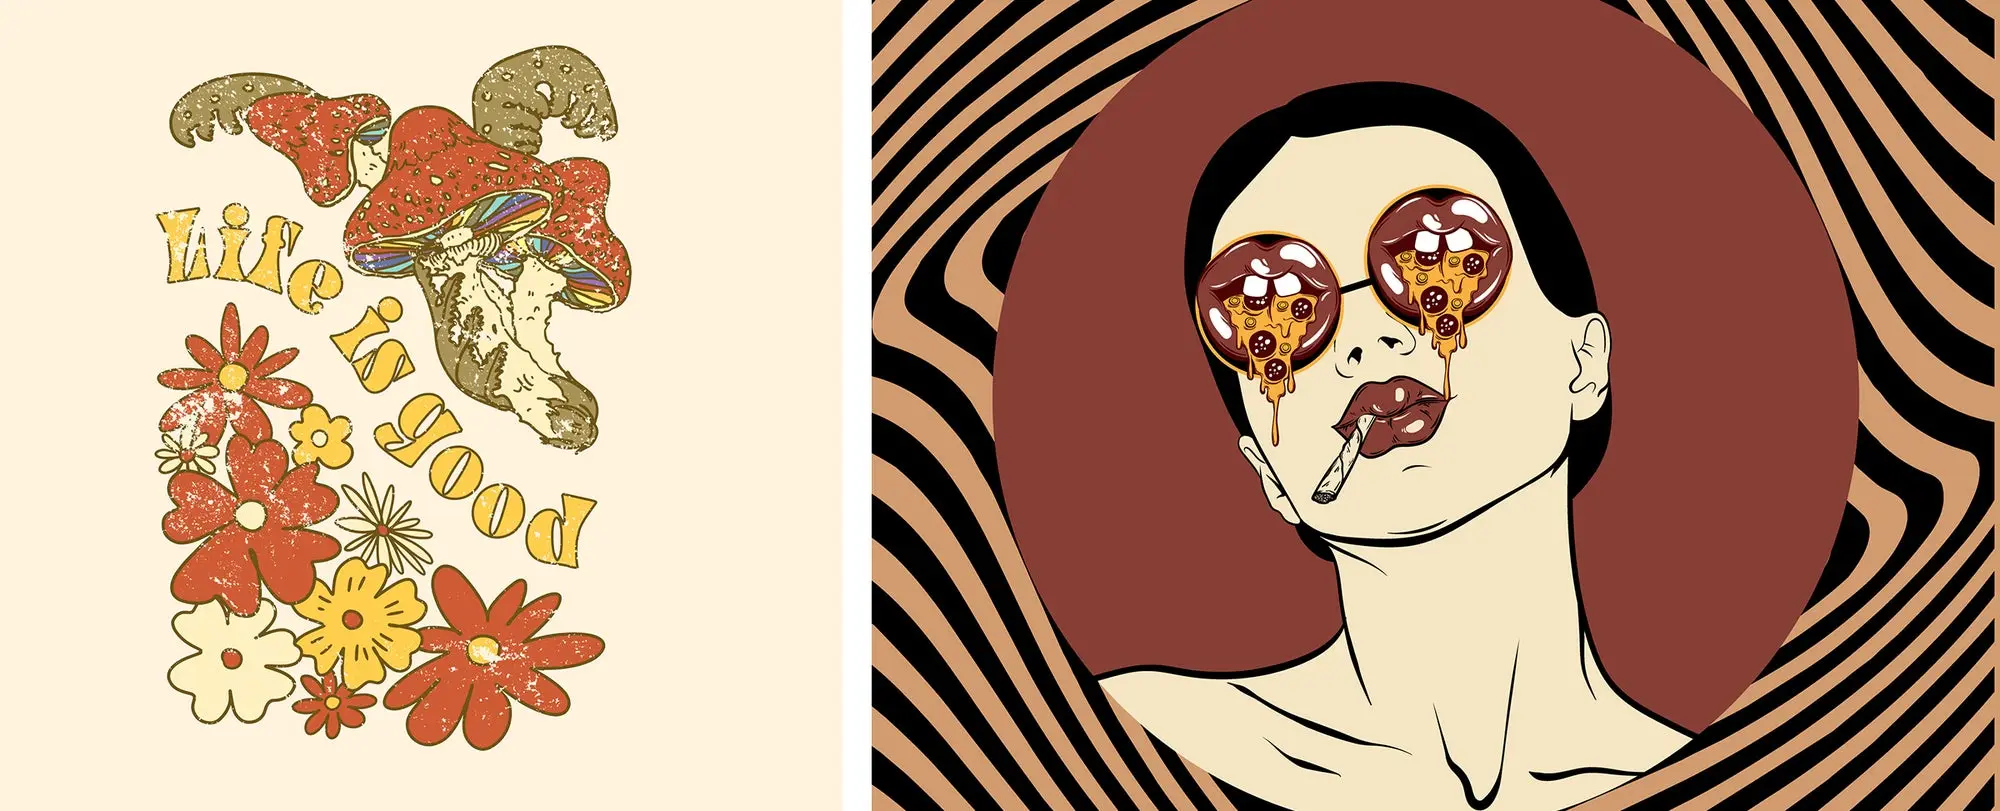 psychedelic illustrations of words and mushrooms and a woman's face